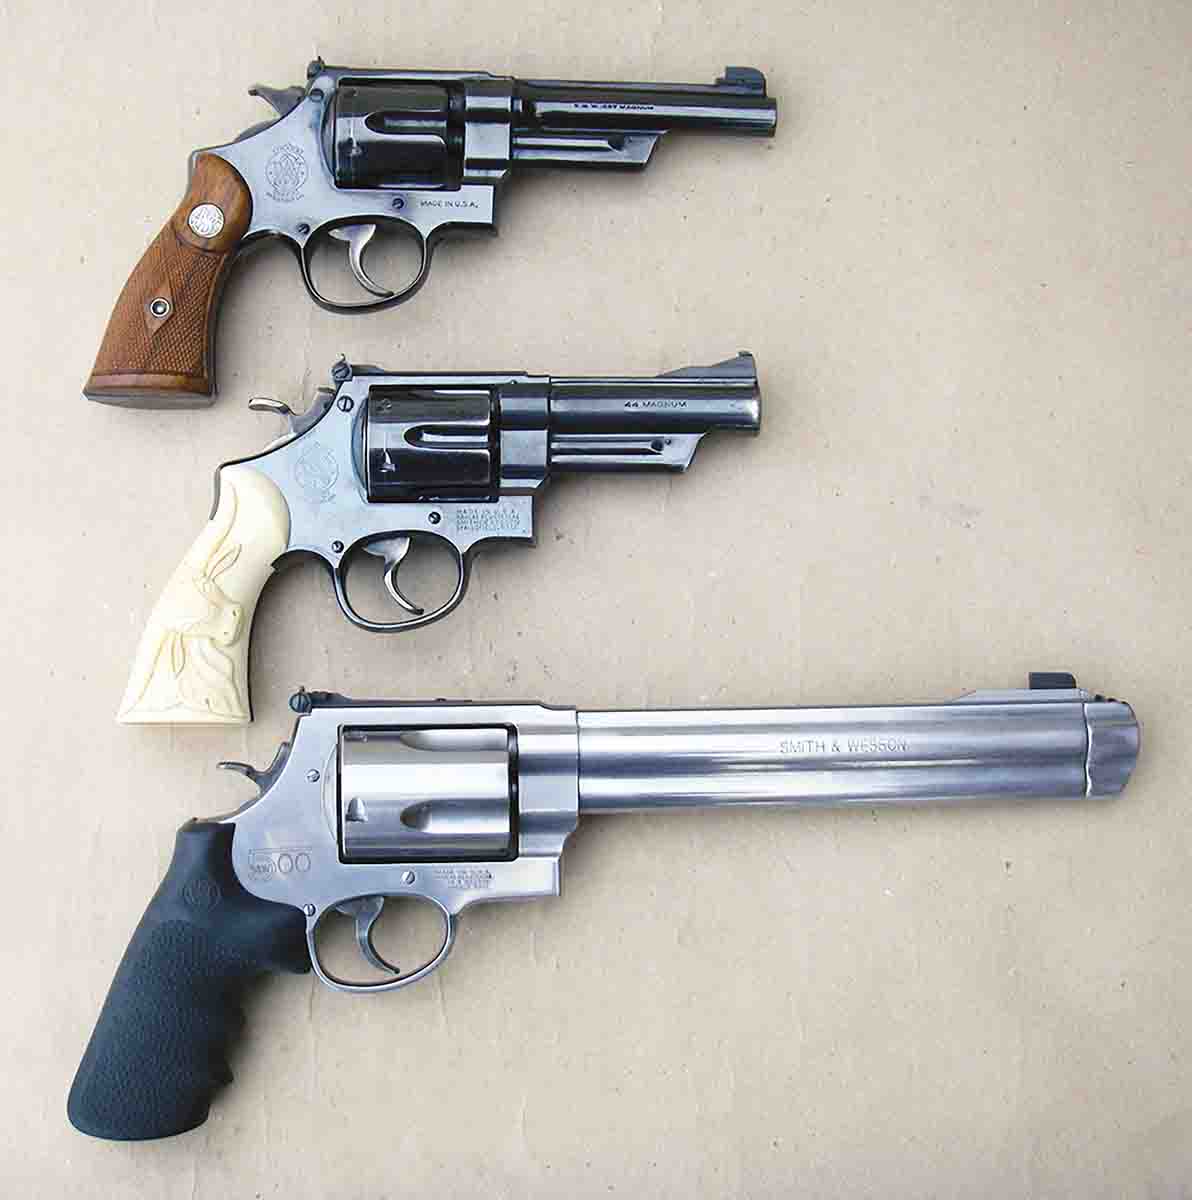 Smith & Wesson has a colorful history of developing magnum revolver cartridges. Top to bottom: Smith & Wesson .357 “Registered” Magnum (circa 1935), Smith & Wesson (pre-Model 29) .44 Magnum (circa 1955), Smith & Wesson Model 500 (circa 2003).